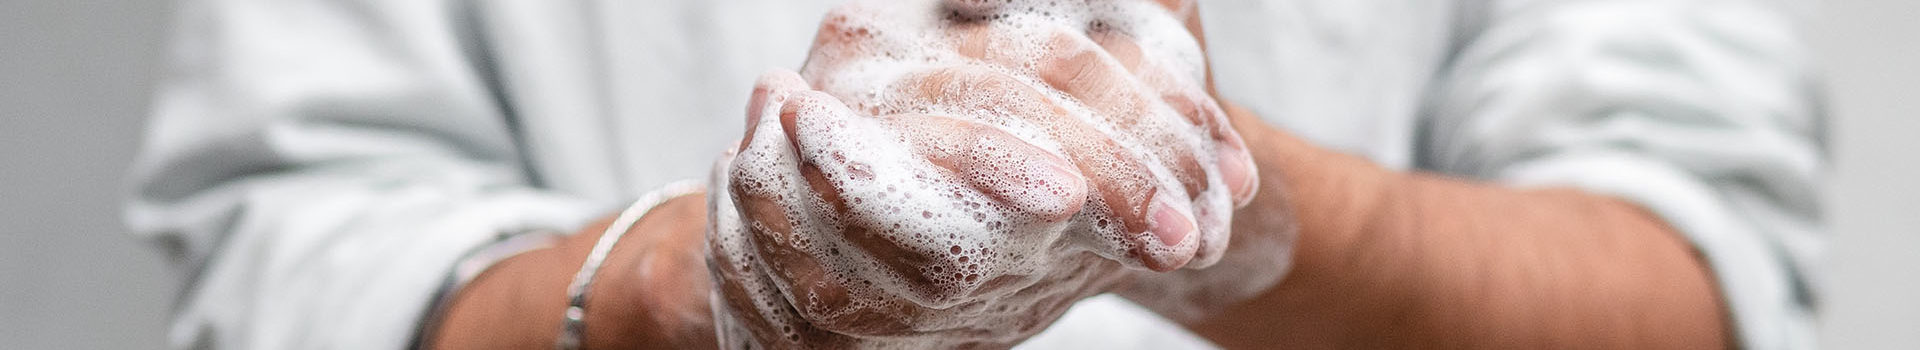 Close up of a person in a white button down shirt washing their hands with lots of soap.